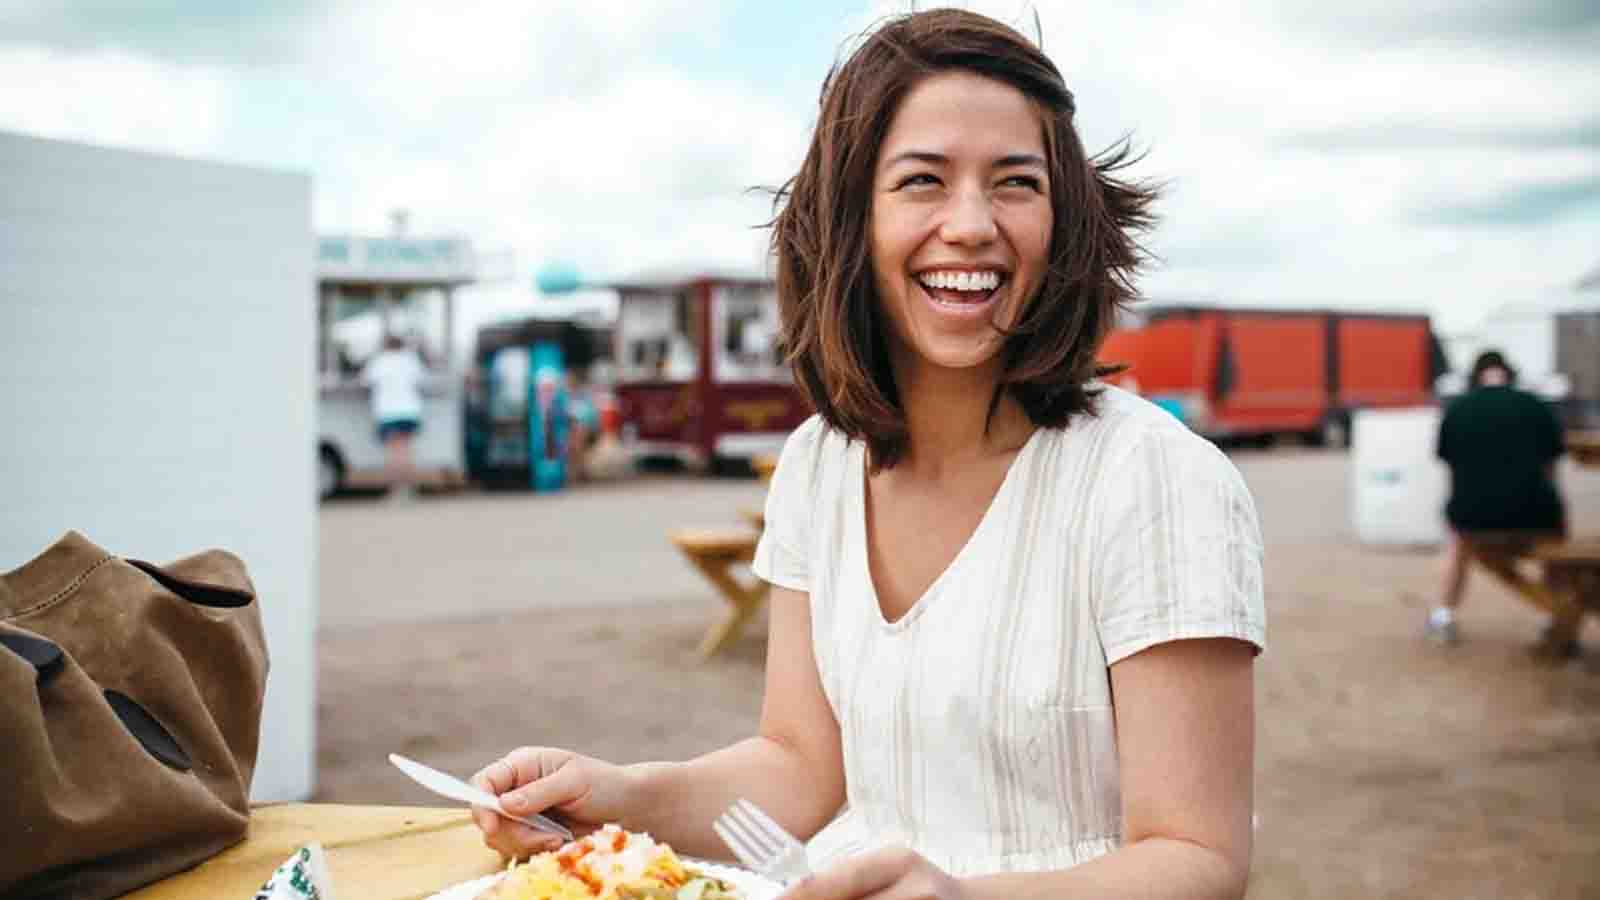 Molly Yeh Sister Jenna And Mia, Parents And Age Revealed